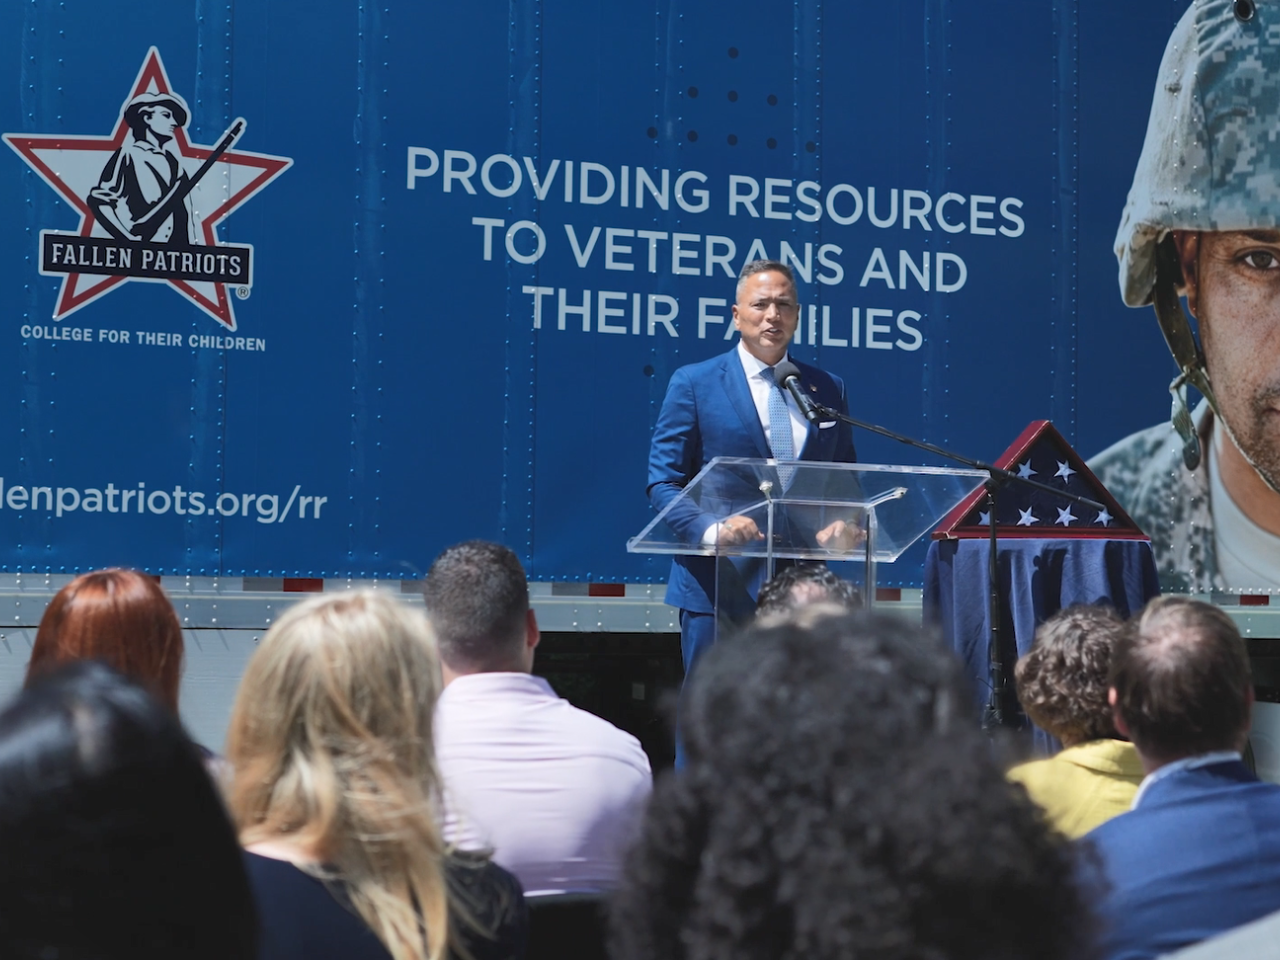 A person speaking at a podium. An american flag in a triangle box to the right and a truck behind covered with "Fallen Patriots" logos and pictures of veterans and service members.